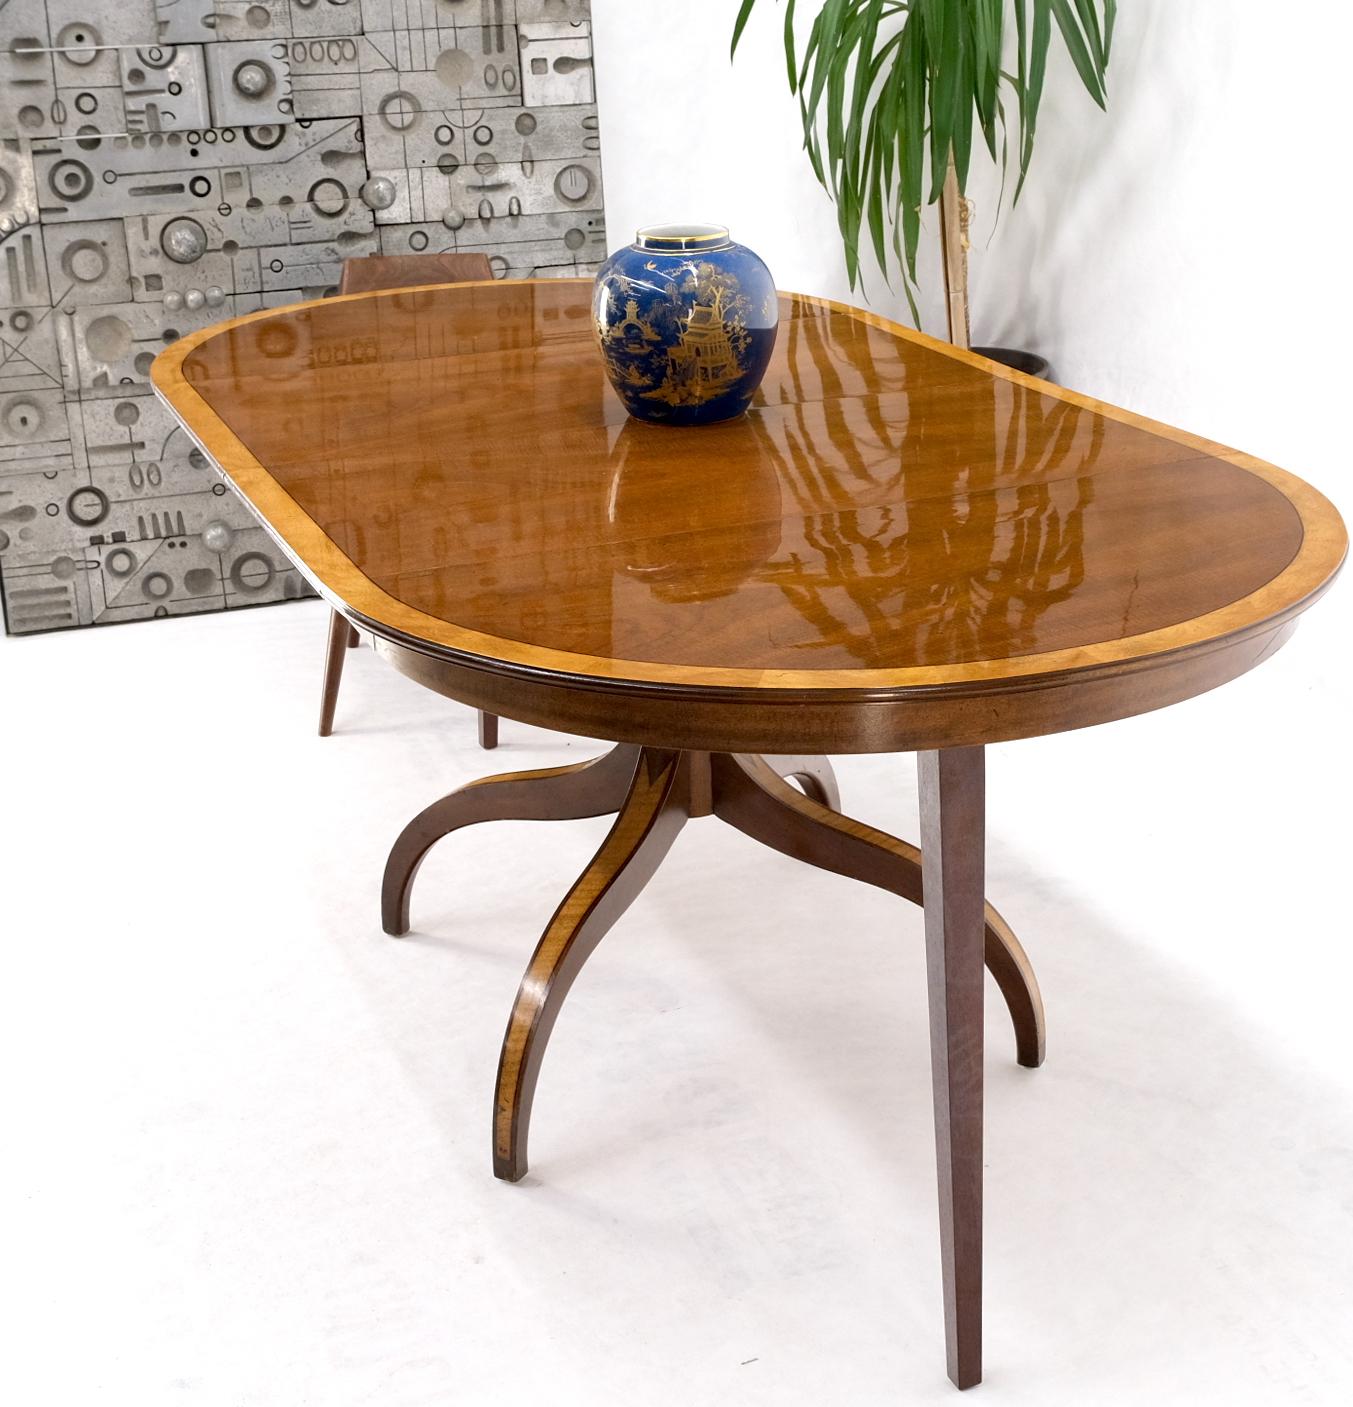 Charak Lacquered Mahogany Banded Round Dining Table w/ 2 Leaves Inlaid Legs Mint For Sale 10